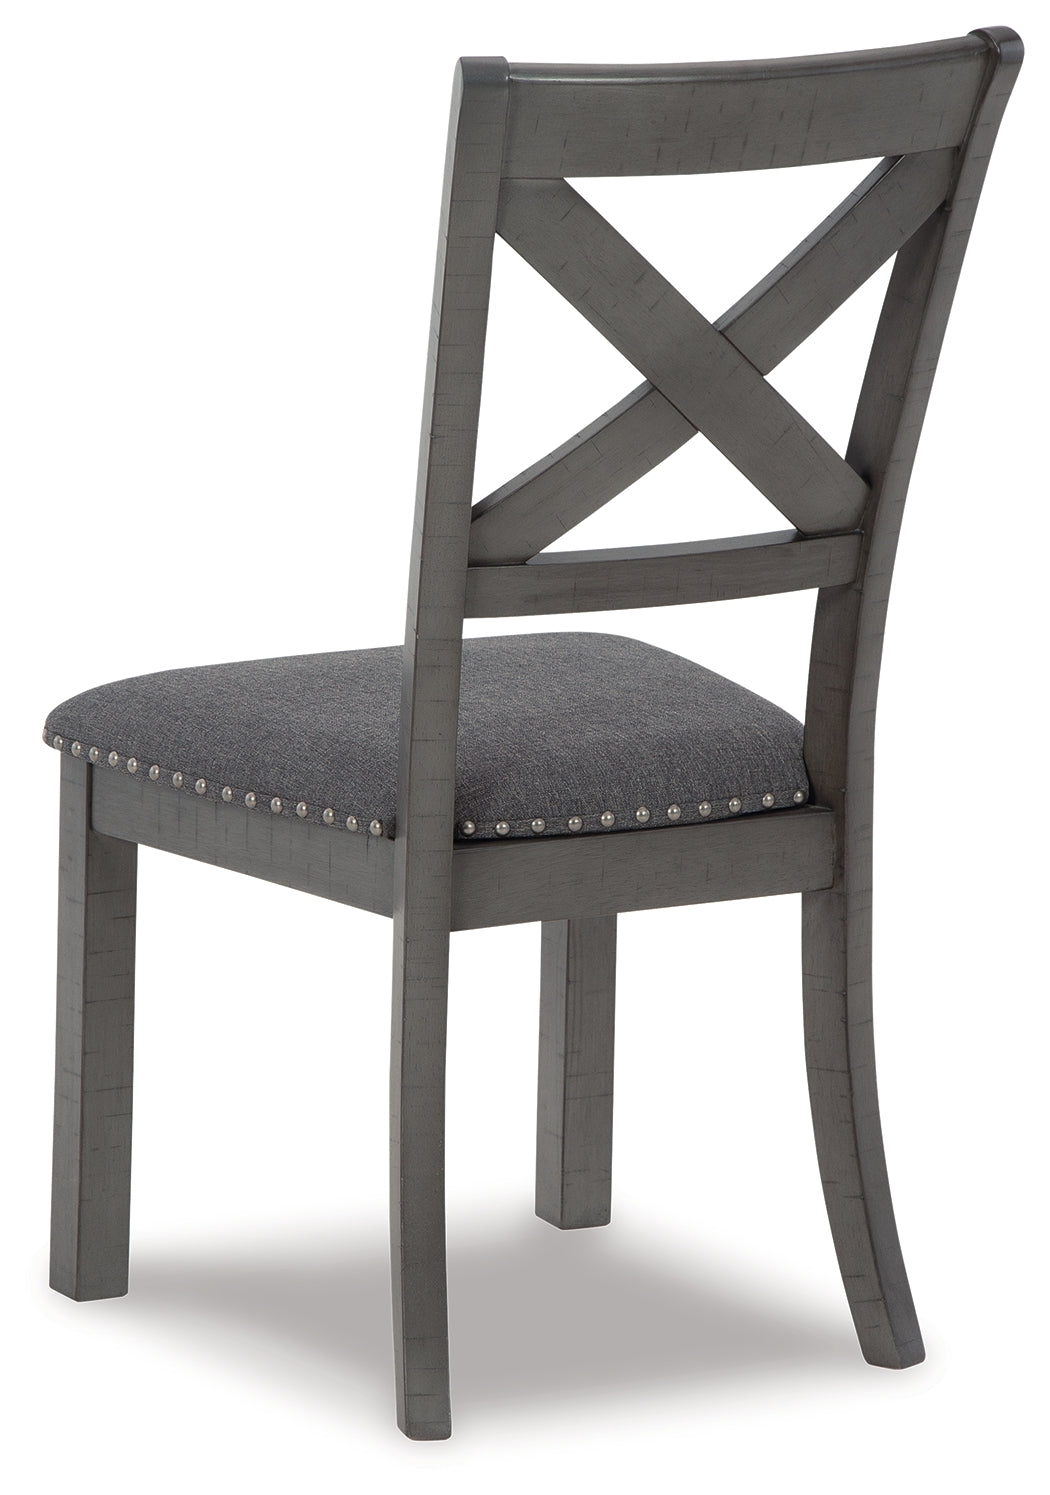 Gray Myshanna Dining Table and 6 Chairs and Bench - PKG013280